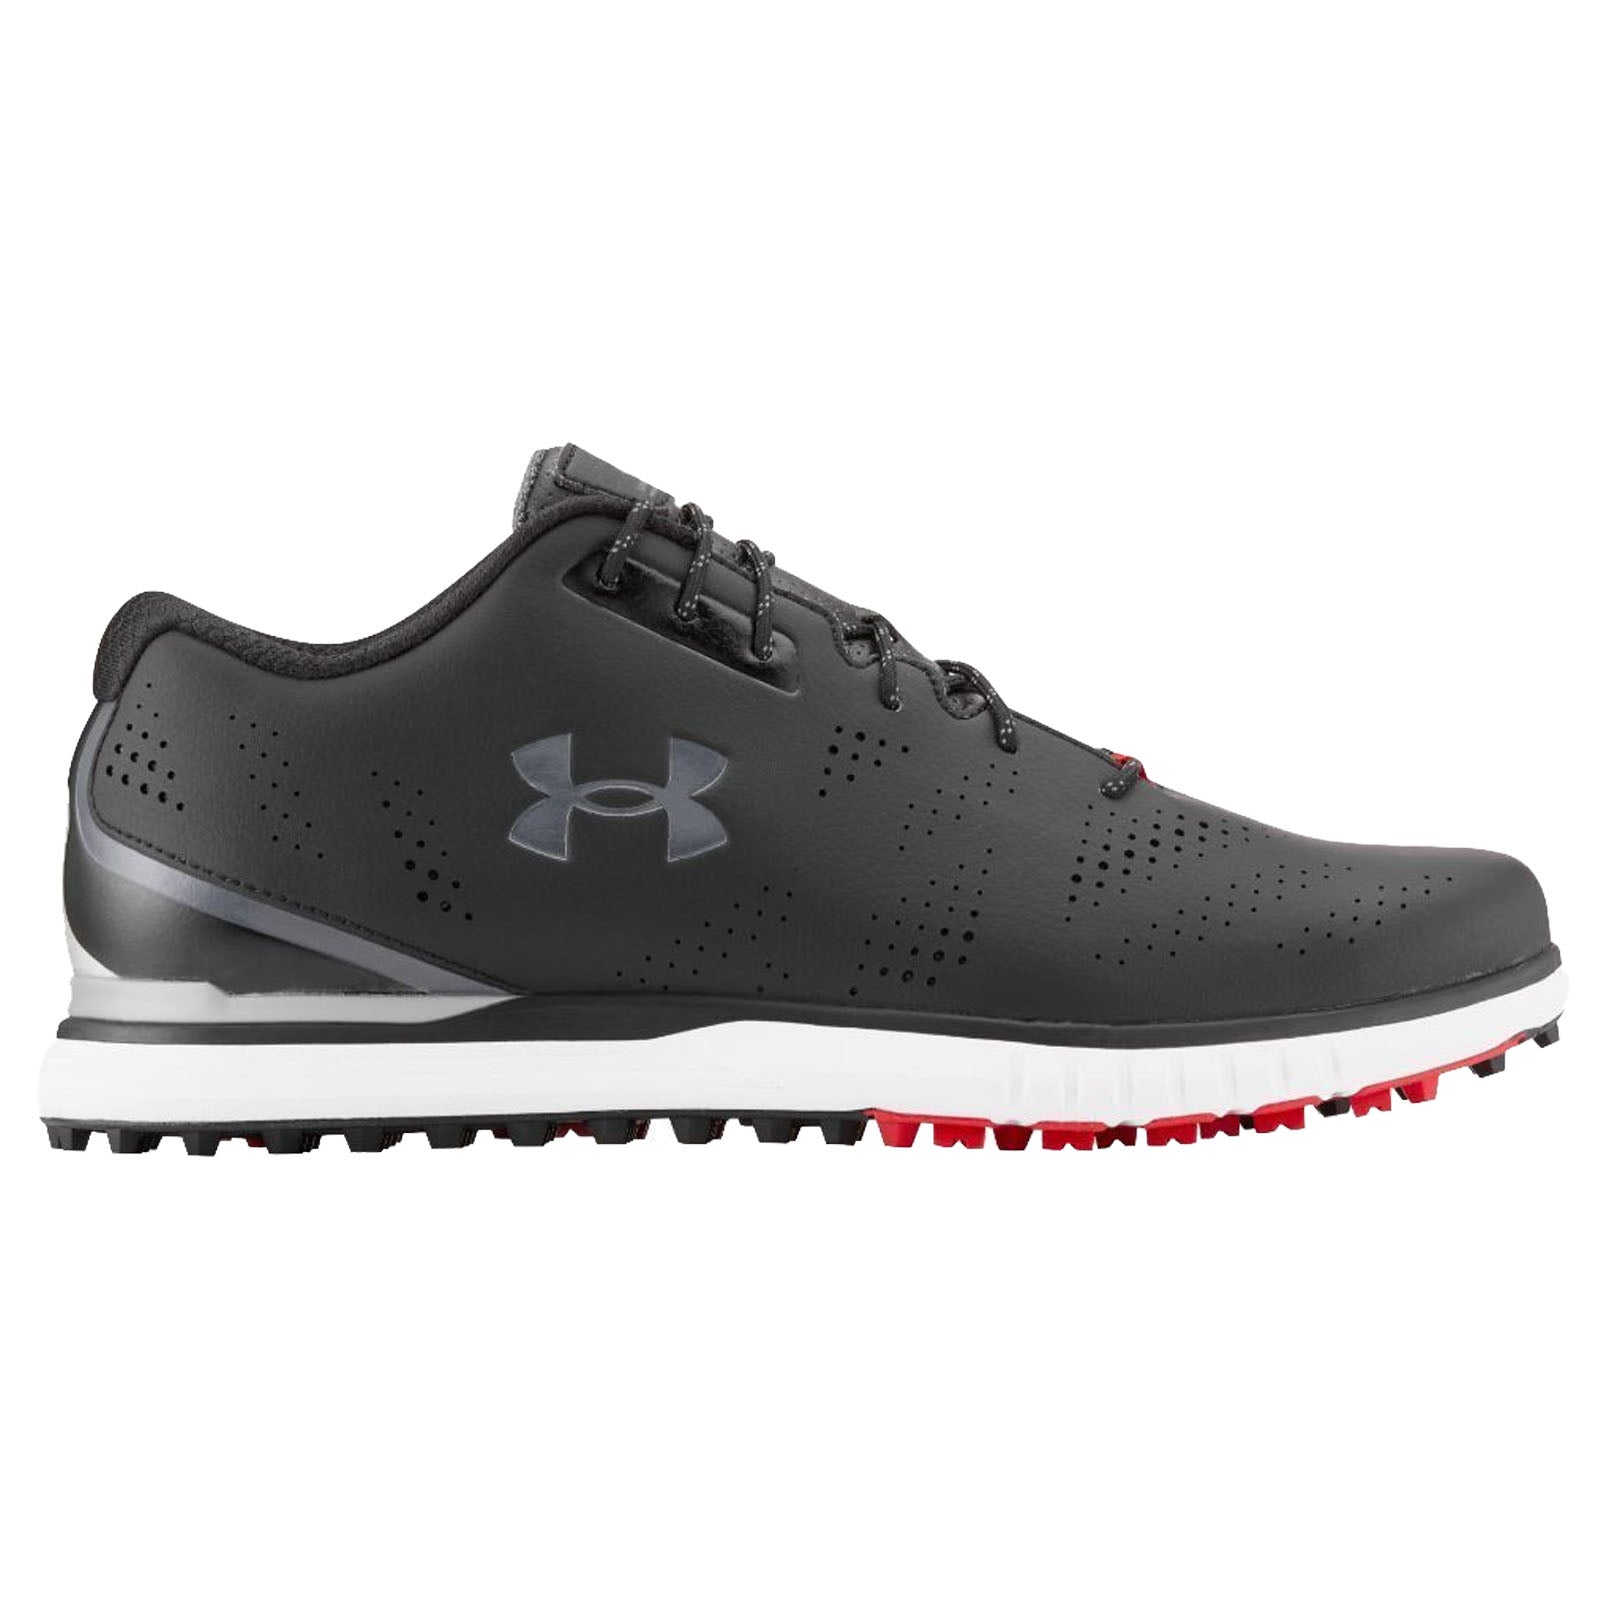 Under Armour Mens Glide SL Golf Shoes